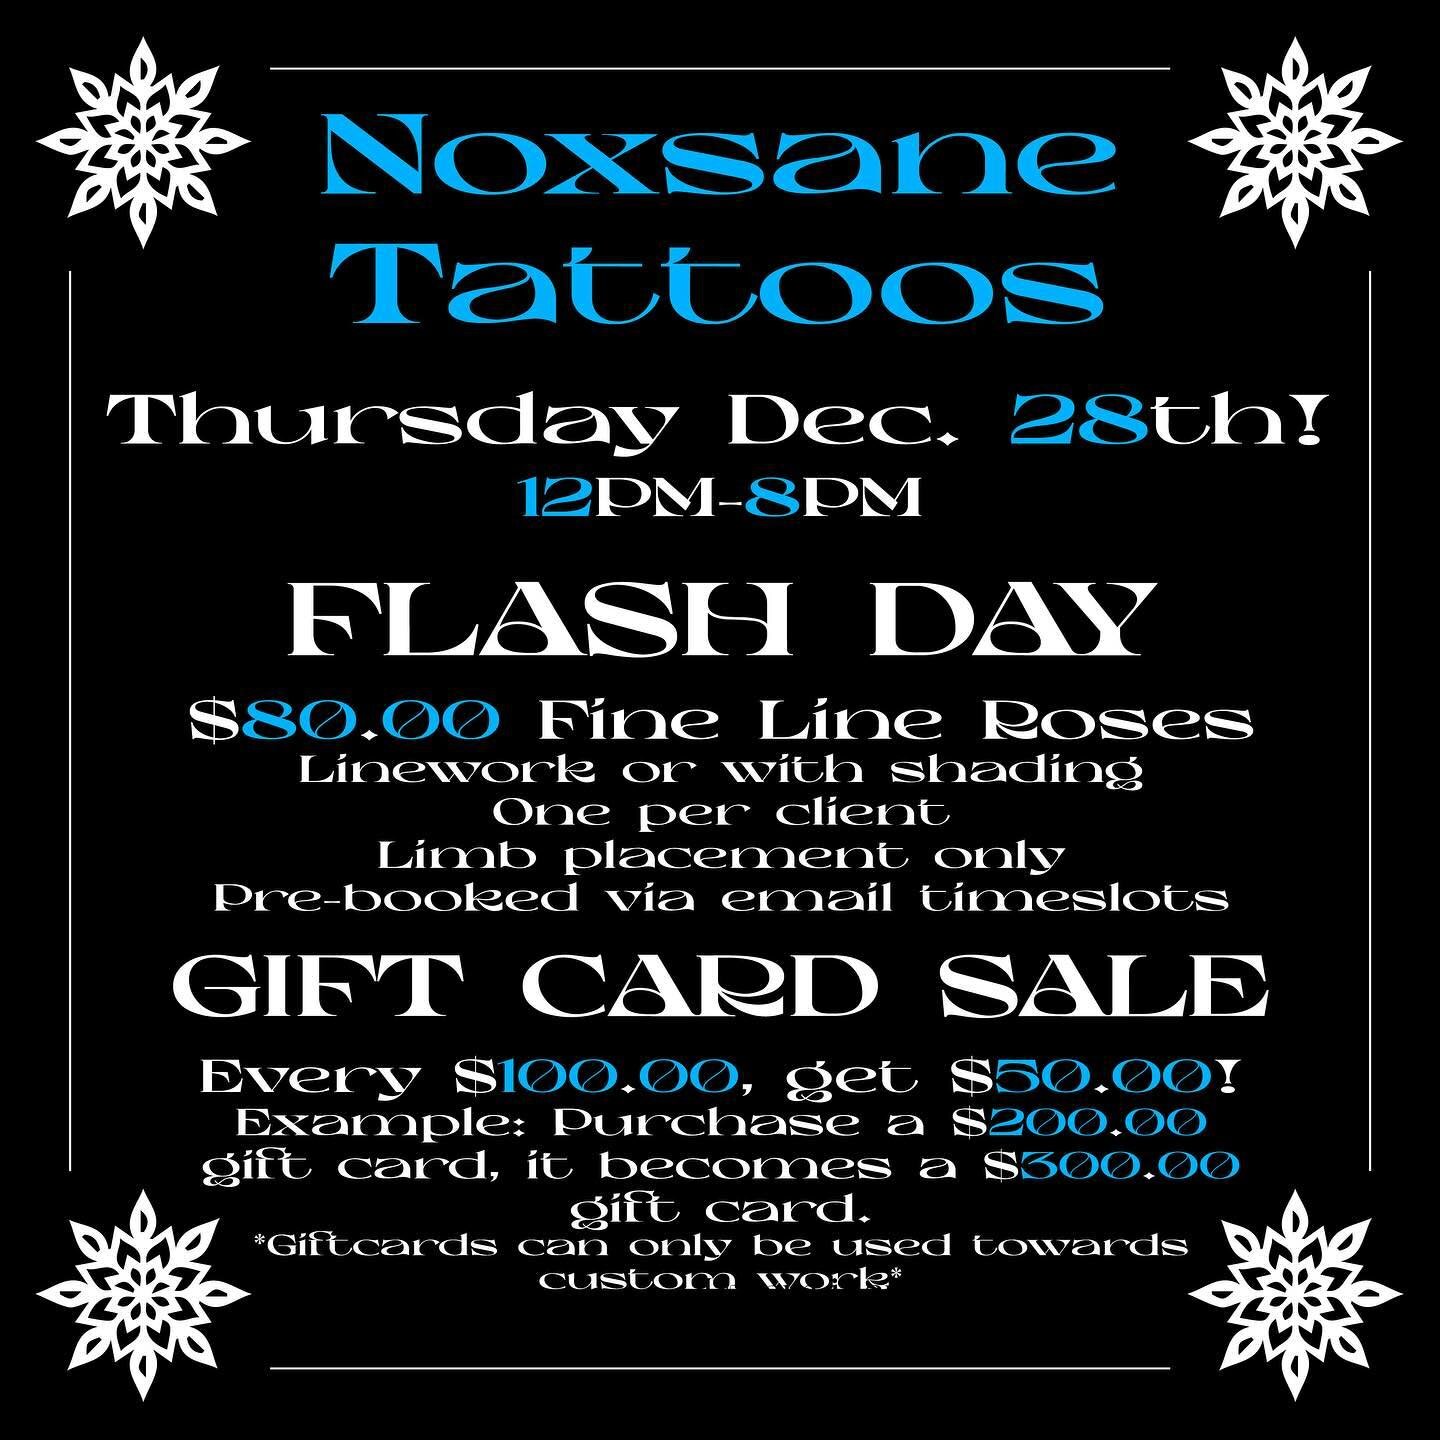 THURSDAY DECEMBER 28th FLASH AND GIFT CARD SALE! 12PM-8PM!

This event is PRE-BOOKED TIMESLOTS ONLY! I will post and update this when all slots are filled.

FLASH SALE/HOW TO BOOK:
$80.00 fine line roses, linework or with shading.
Roughly 3.5-4&rdquo